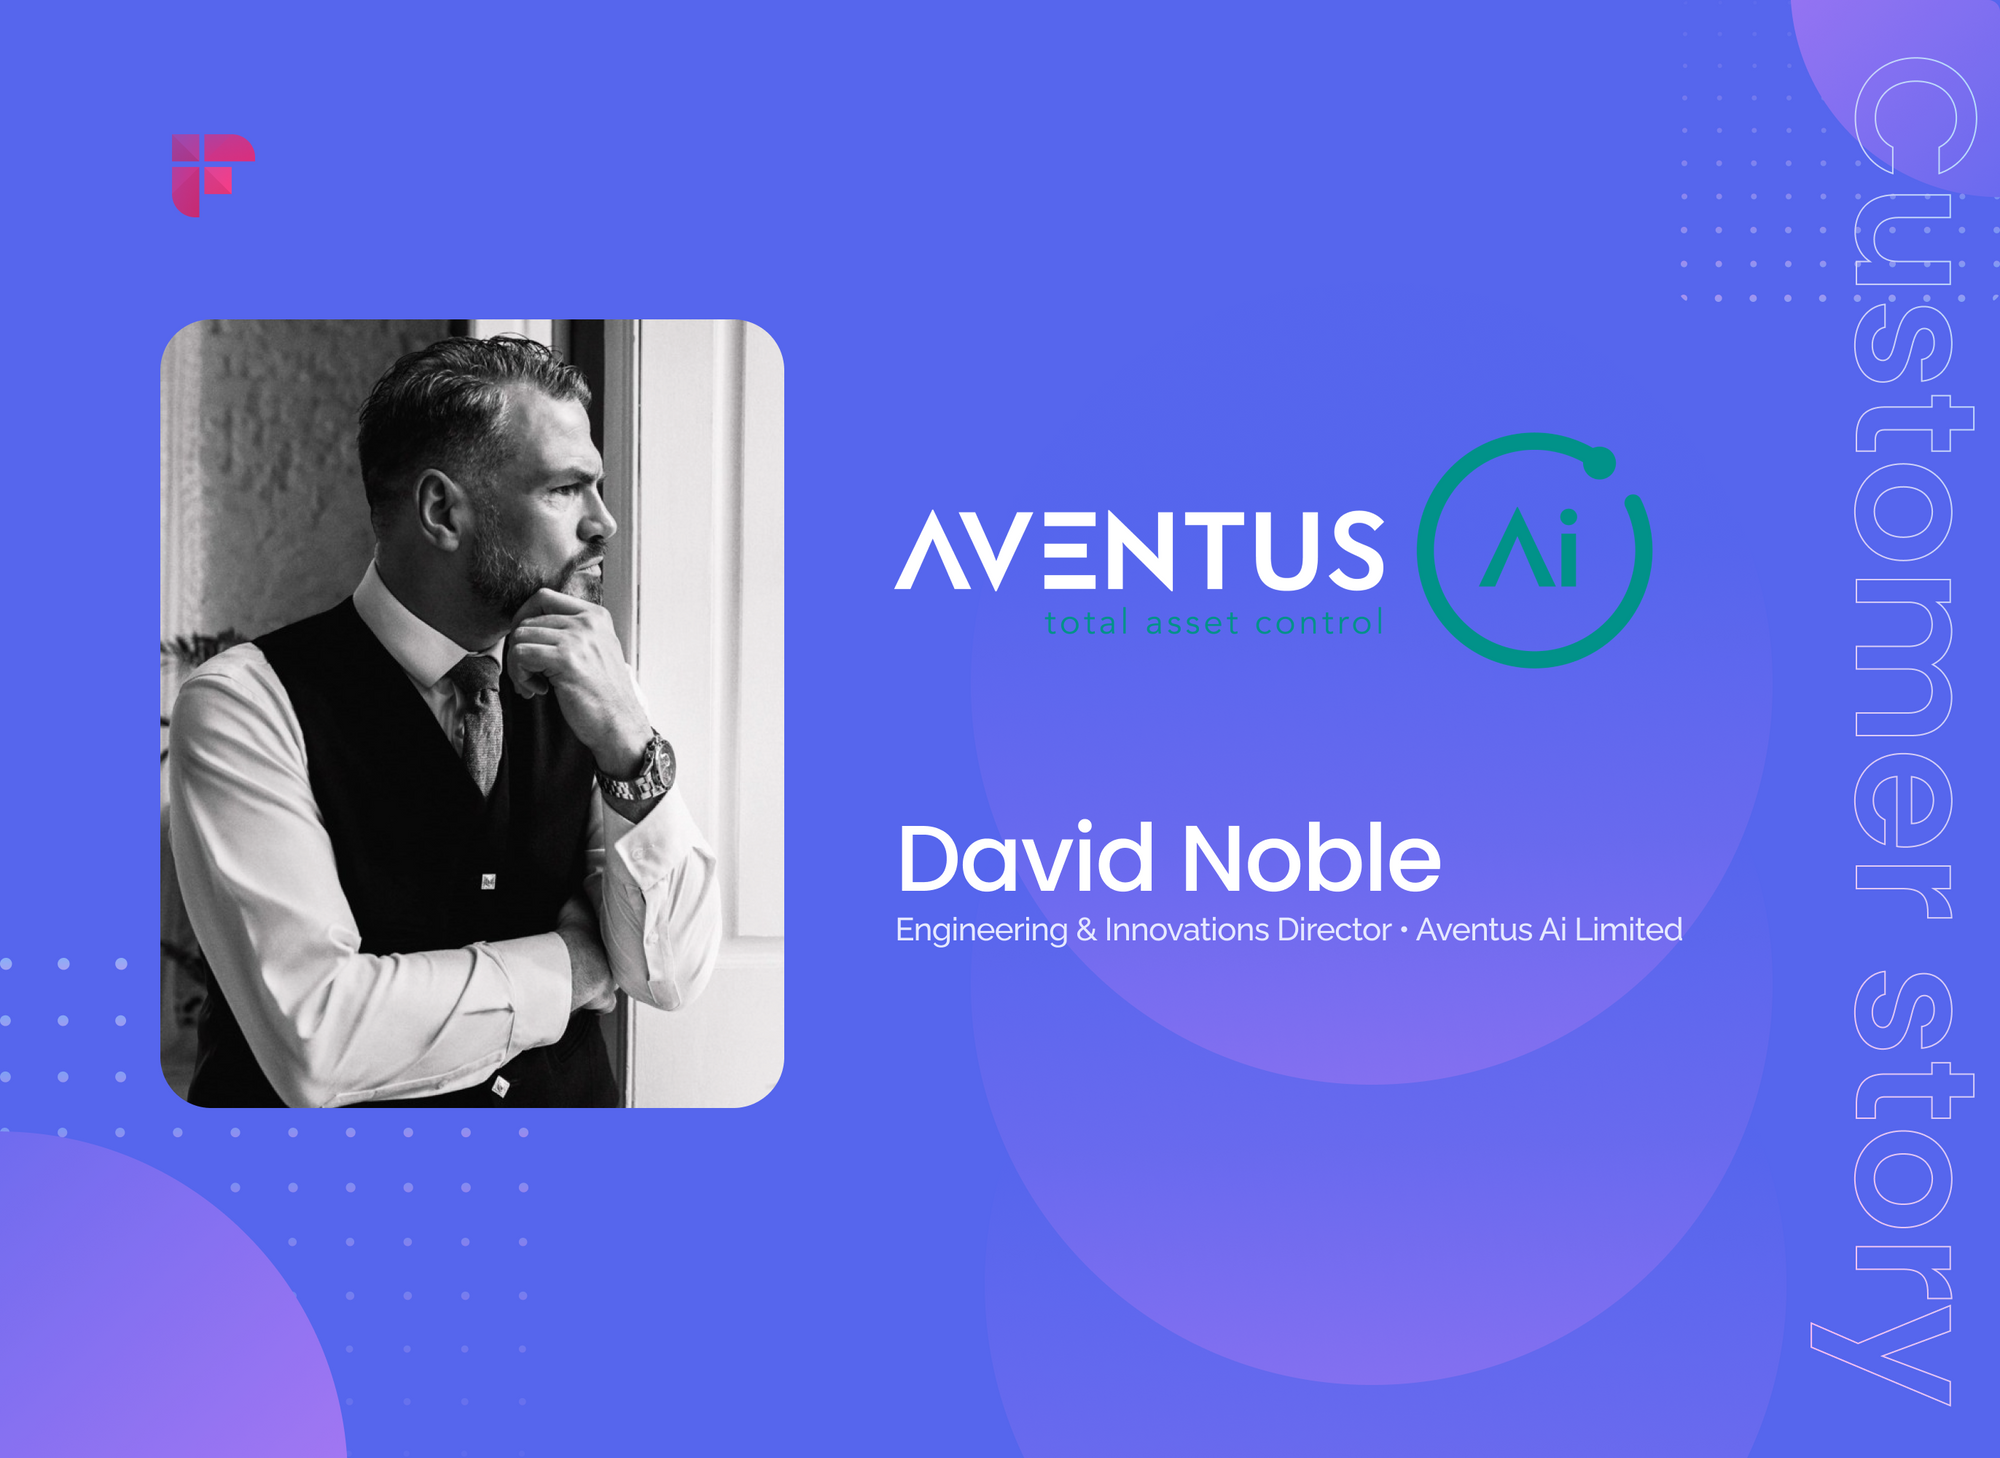 https://fireflies.ai/blog/content/images/size/w2000/2021/07/Aventus-AI-Limited-1.png